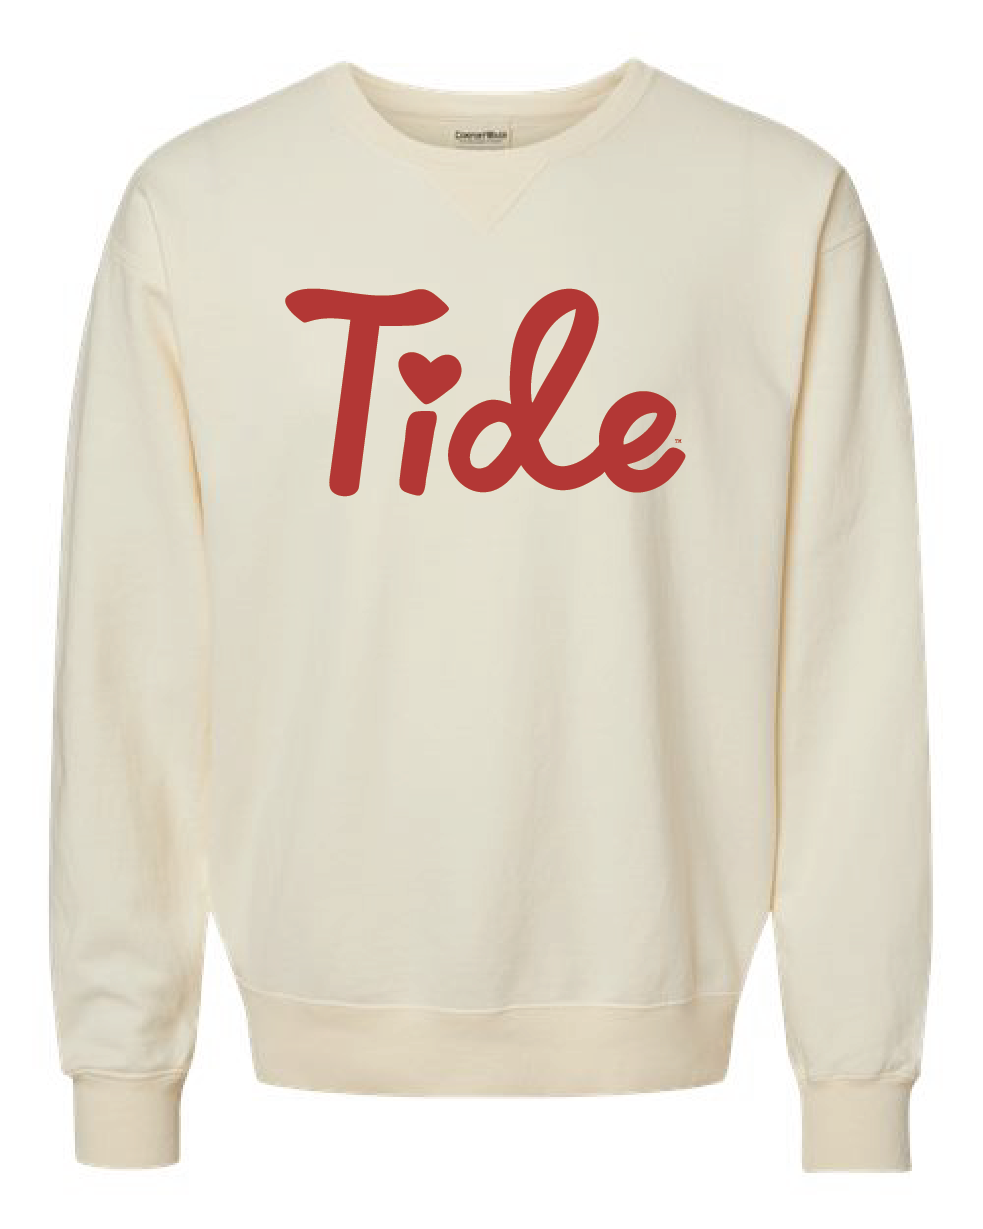 cross my Ts and heart my Is Tide crewneck